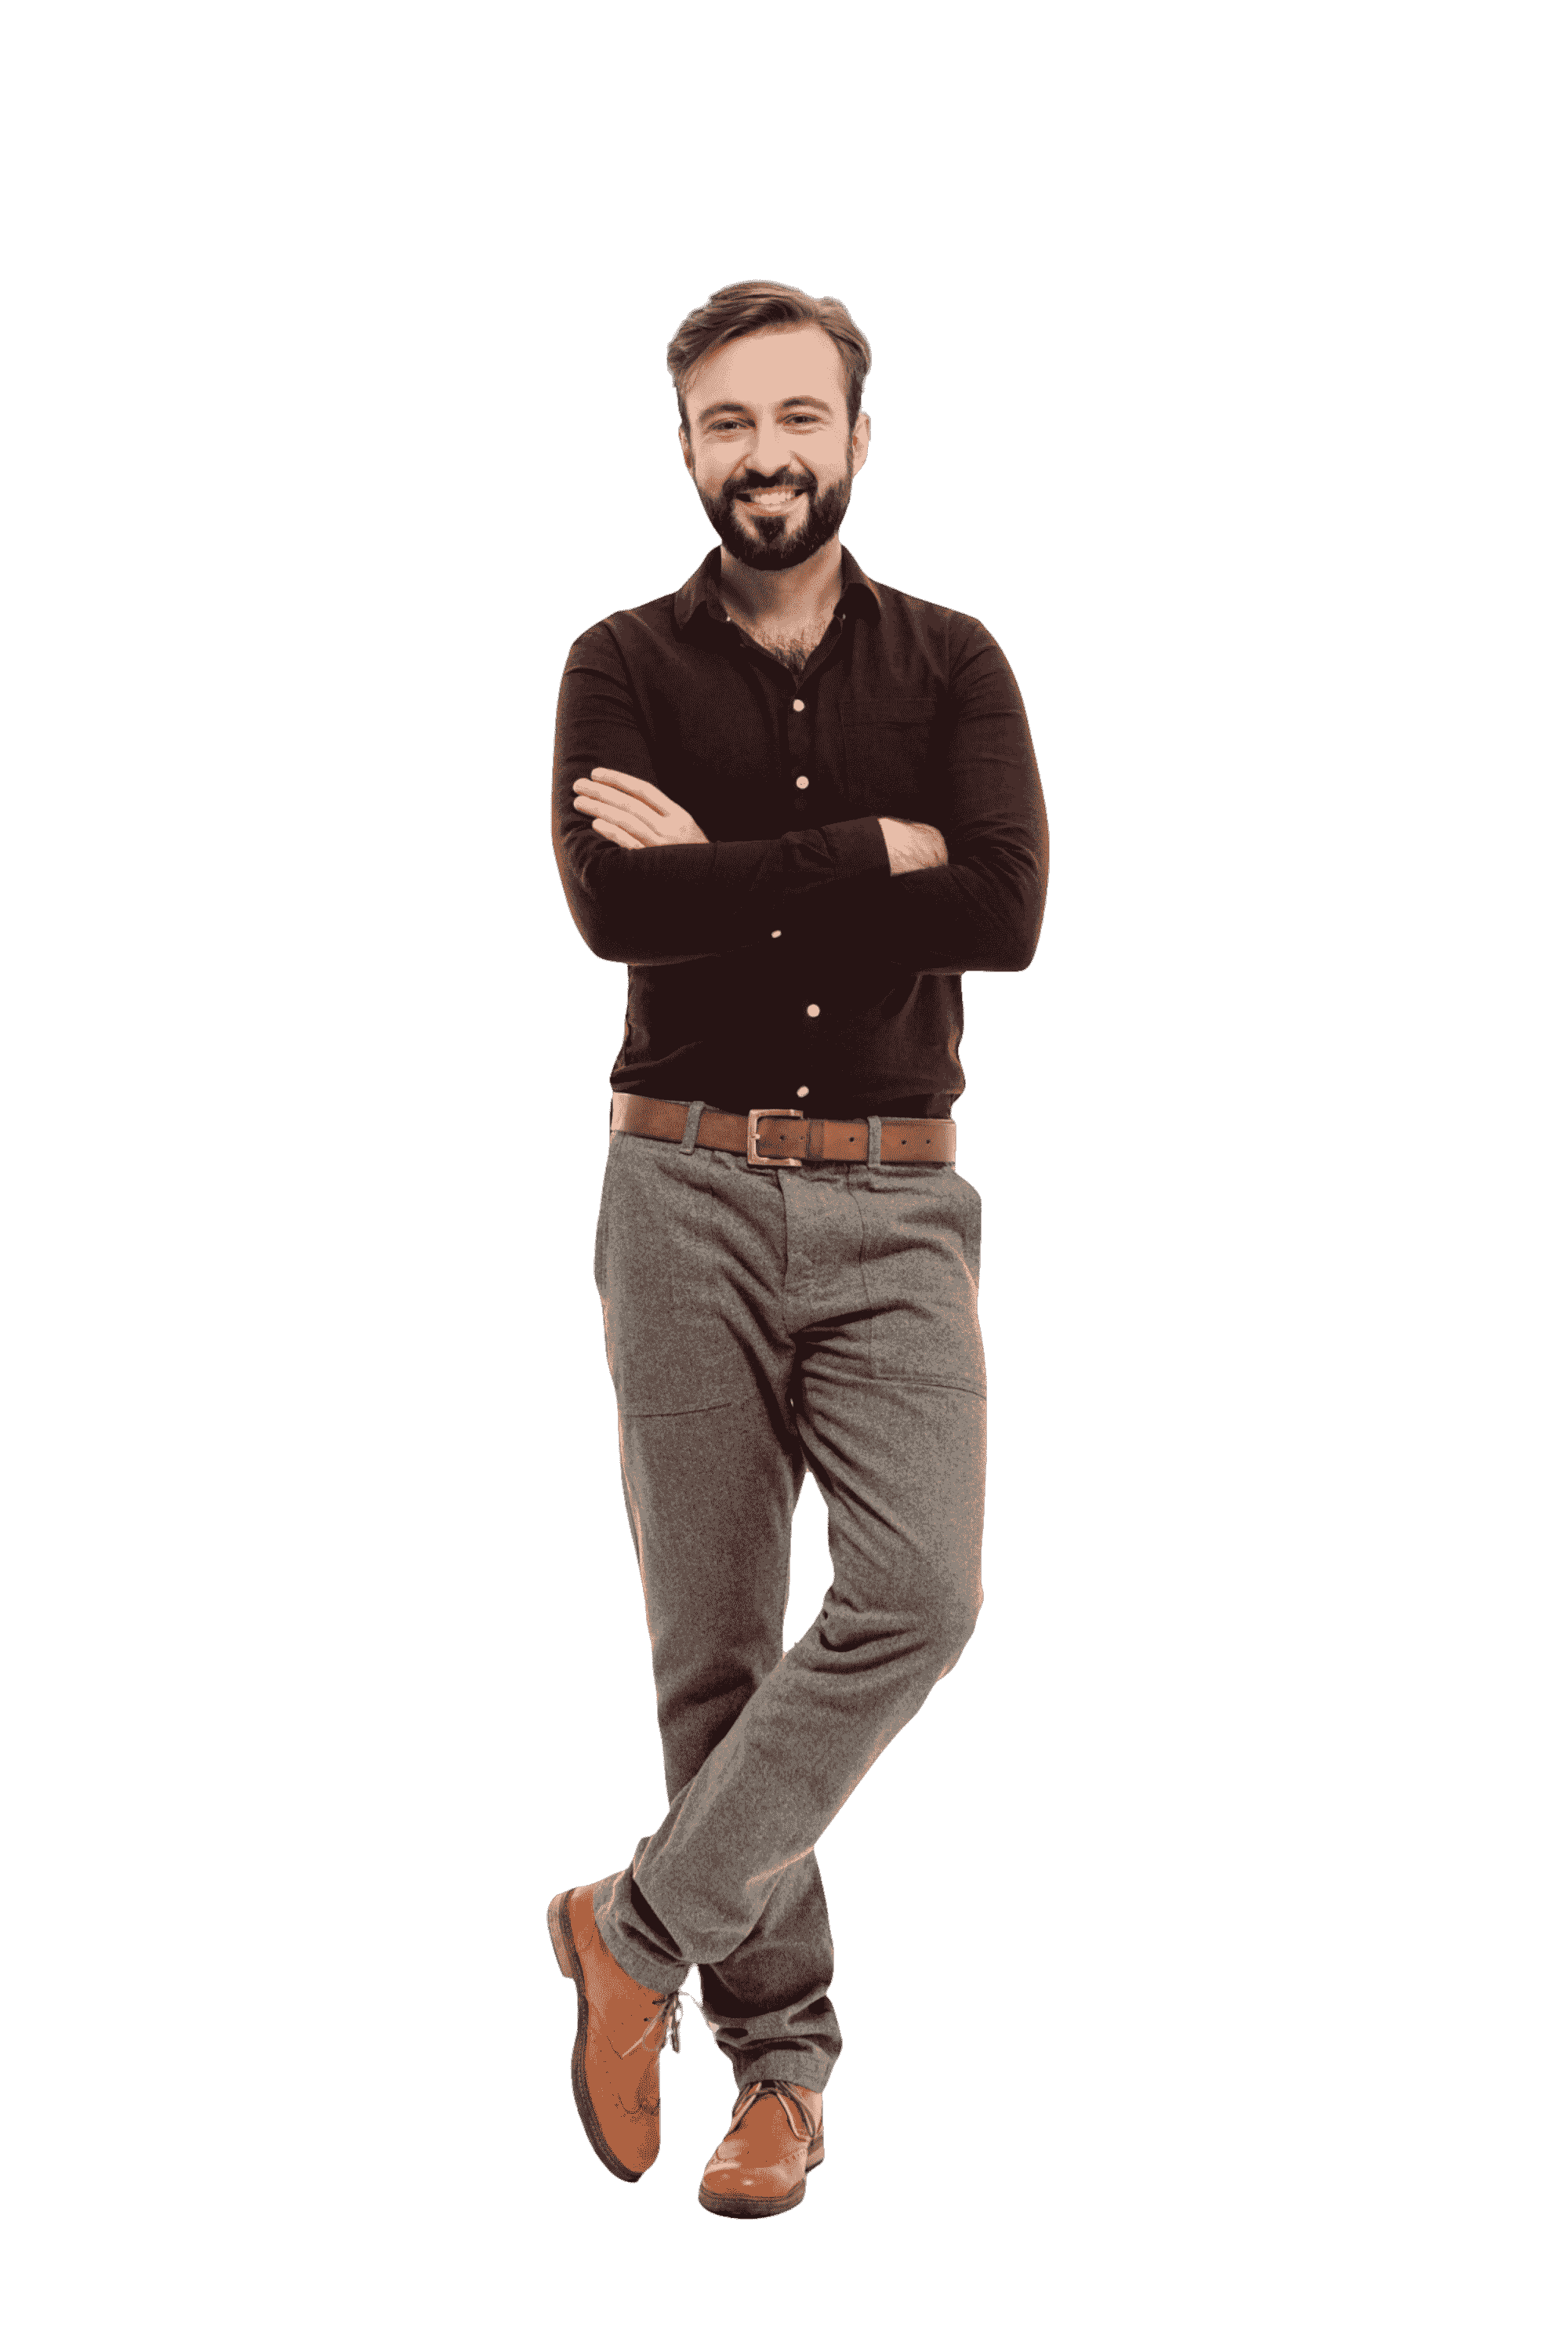 Relaxed Smiling Man Transparent Image Download,Full length portrait of a relaxed smiling man